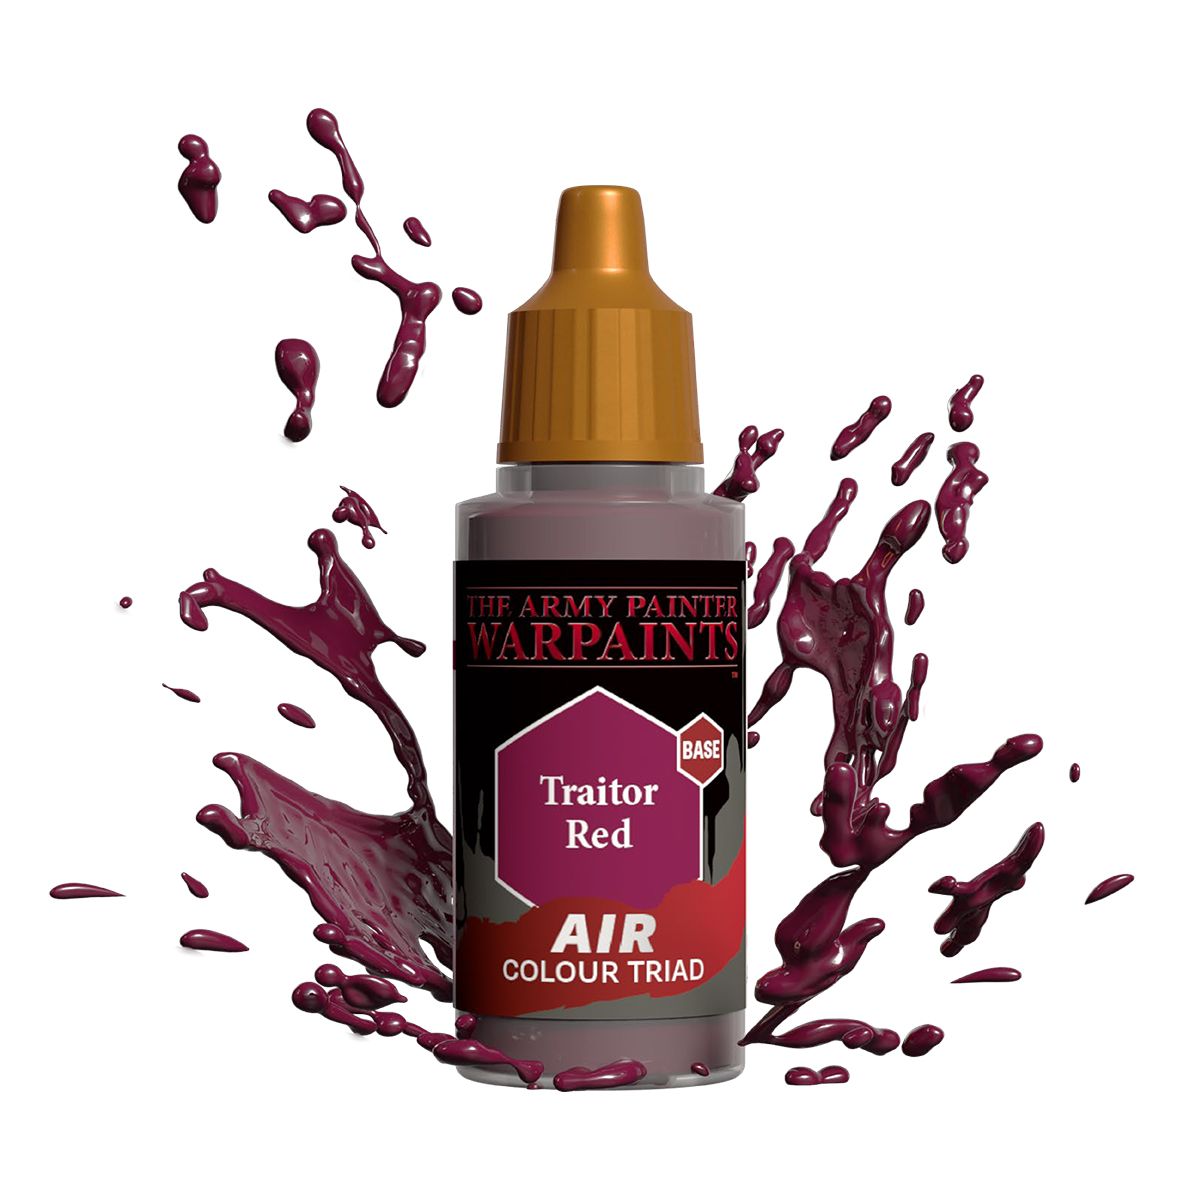 Army Painter Warpaints Air: Traitor Red 18ml